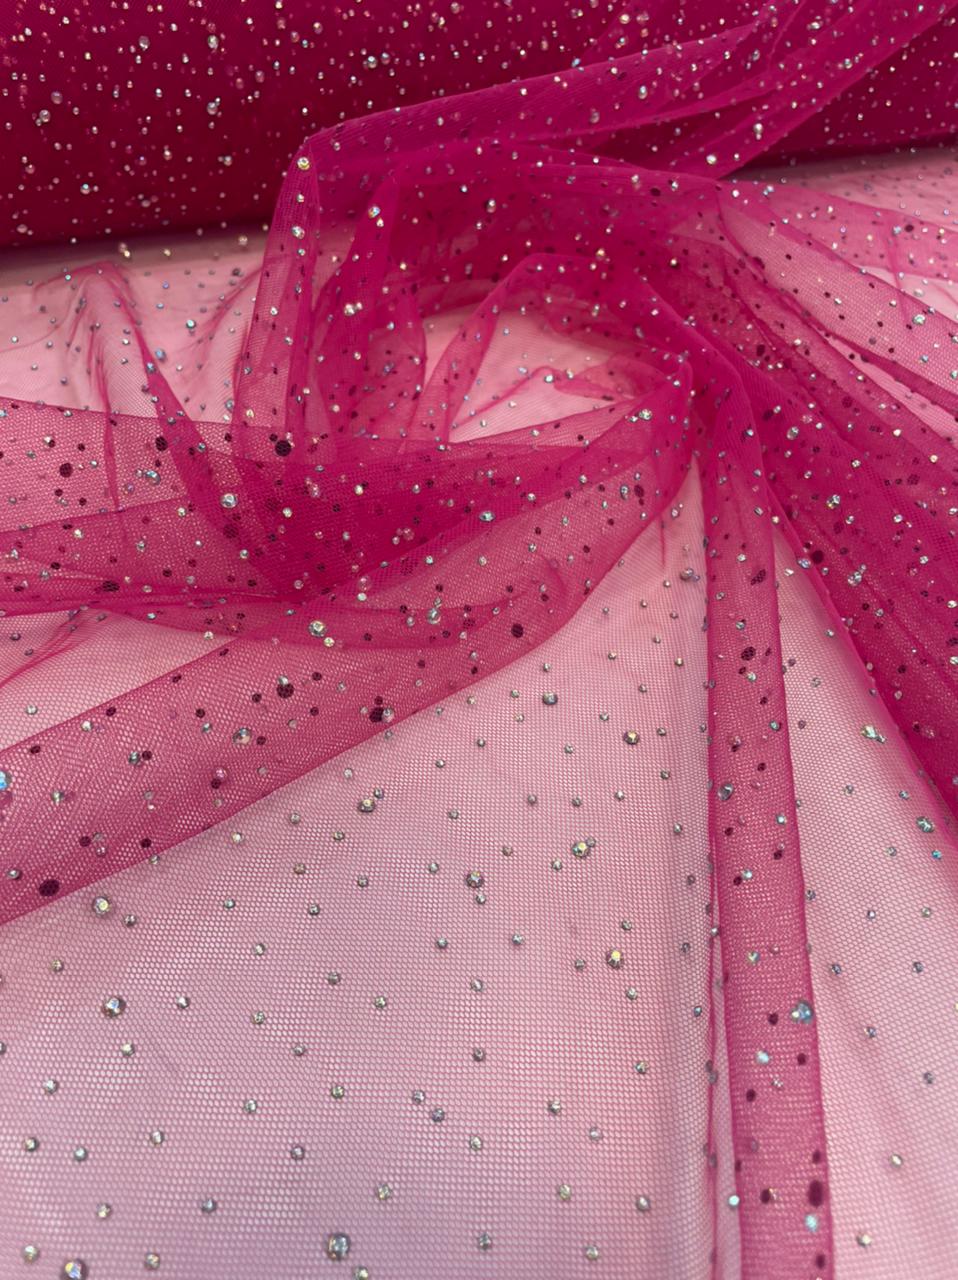 Tule Party Fundo Pink com Strass Boreal